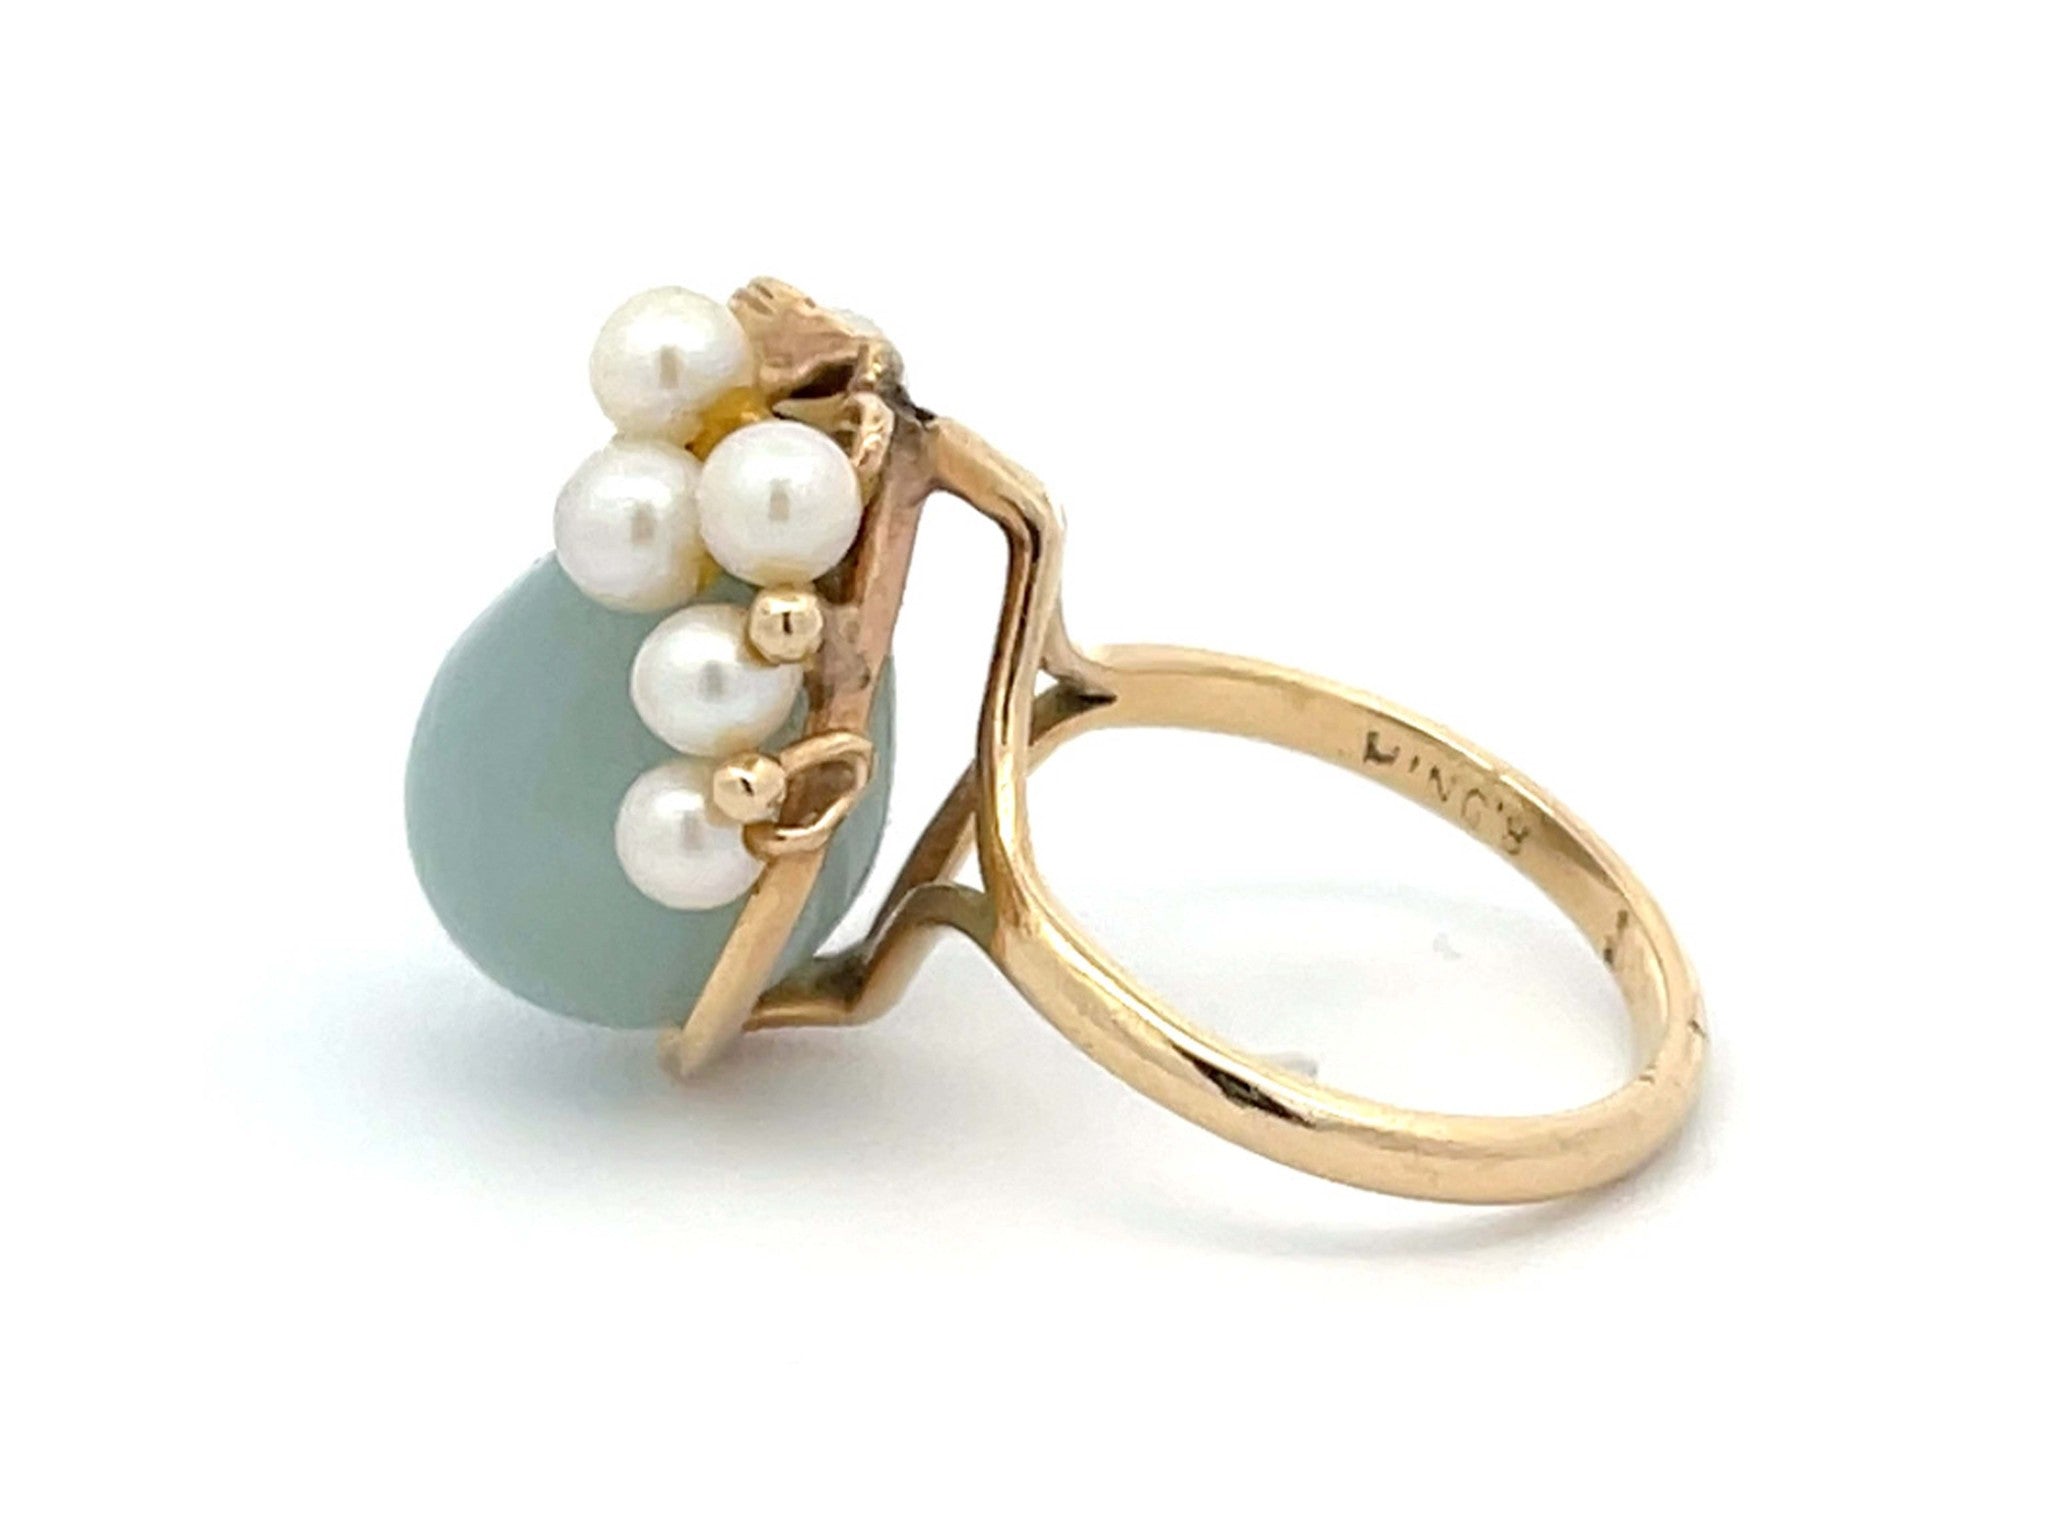 Mings Pear Shaped Jade and Pearl Ring in 14k Yellow Gold